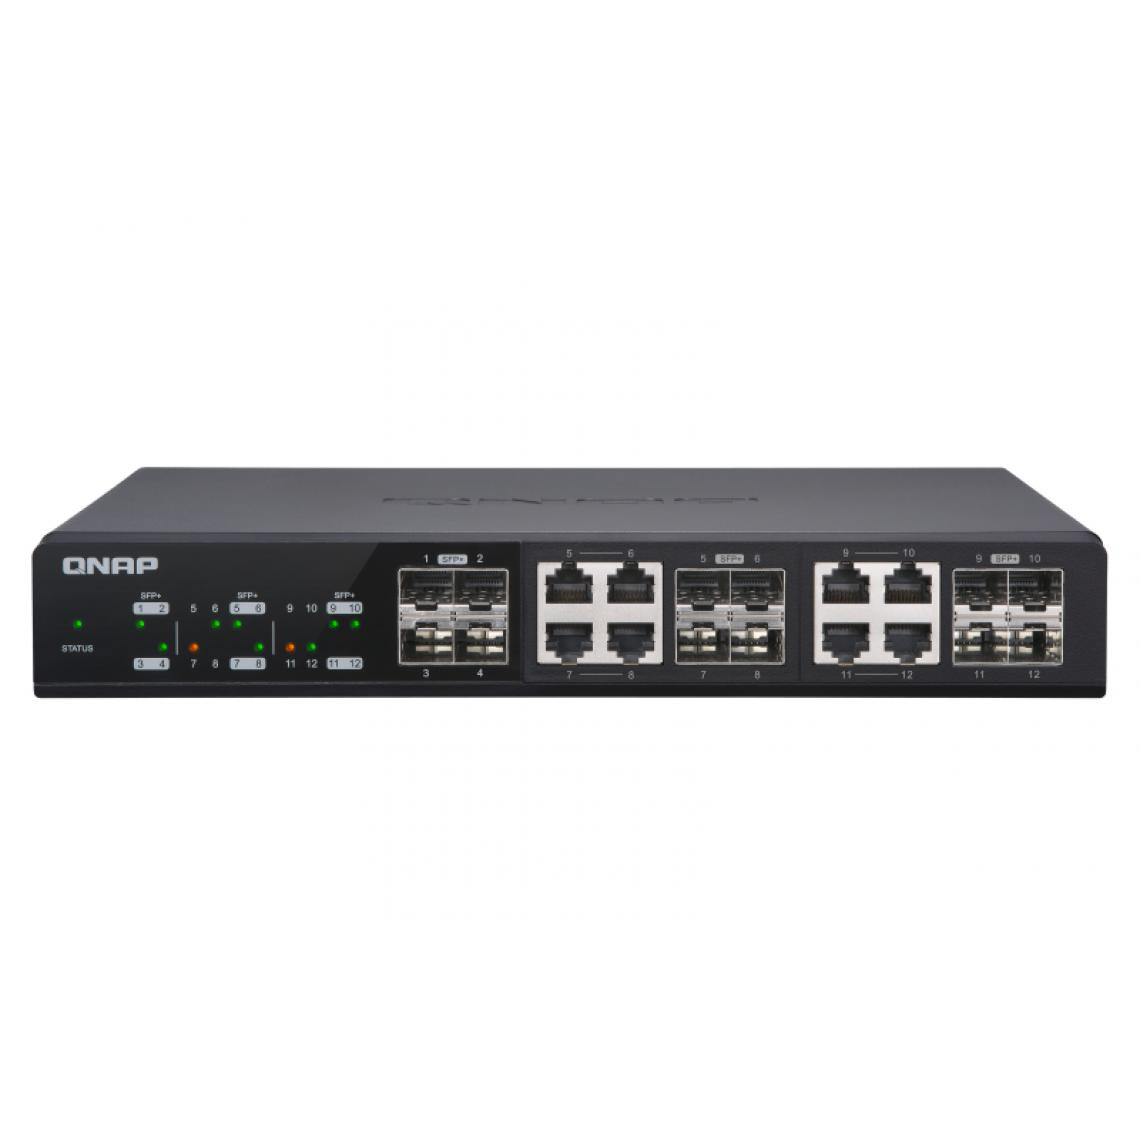 Qnap - QSW-M1208-8C Managed Switch 12P QSW-M1208-8C Managed Switch 12 port of 10GbE port speed 4 port SFP+ 8 port SFP+/ NBASE-T - Switch